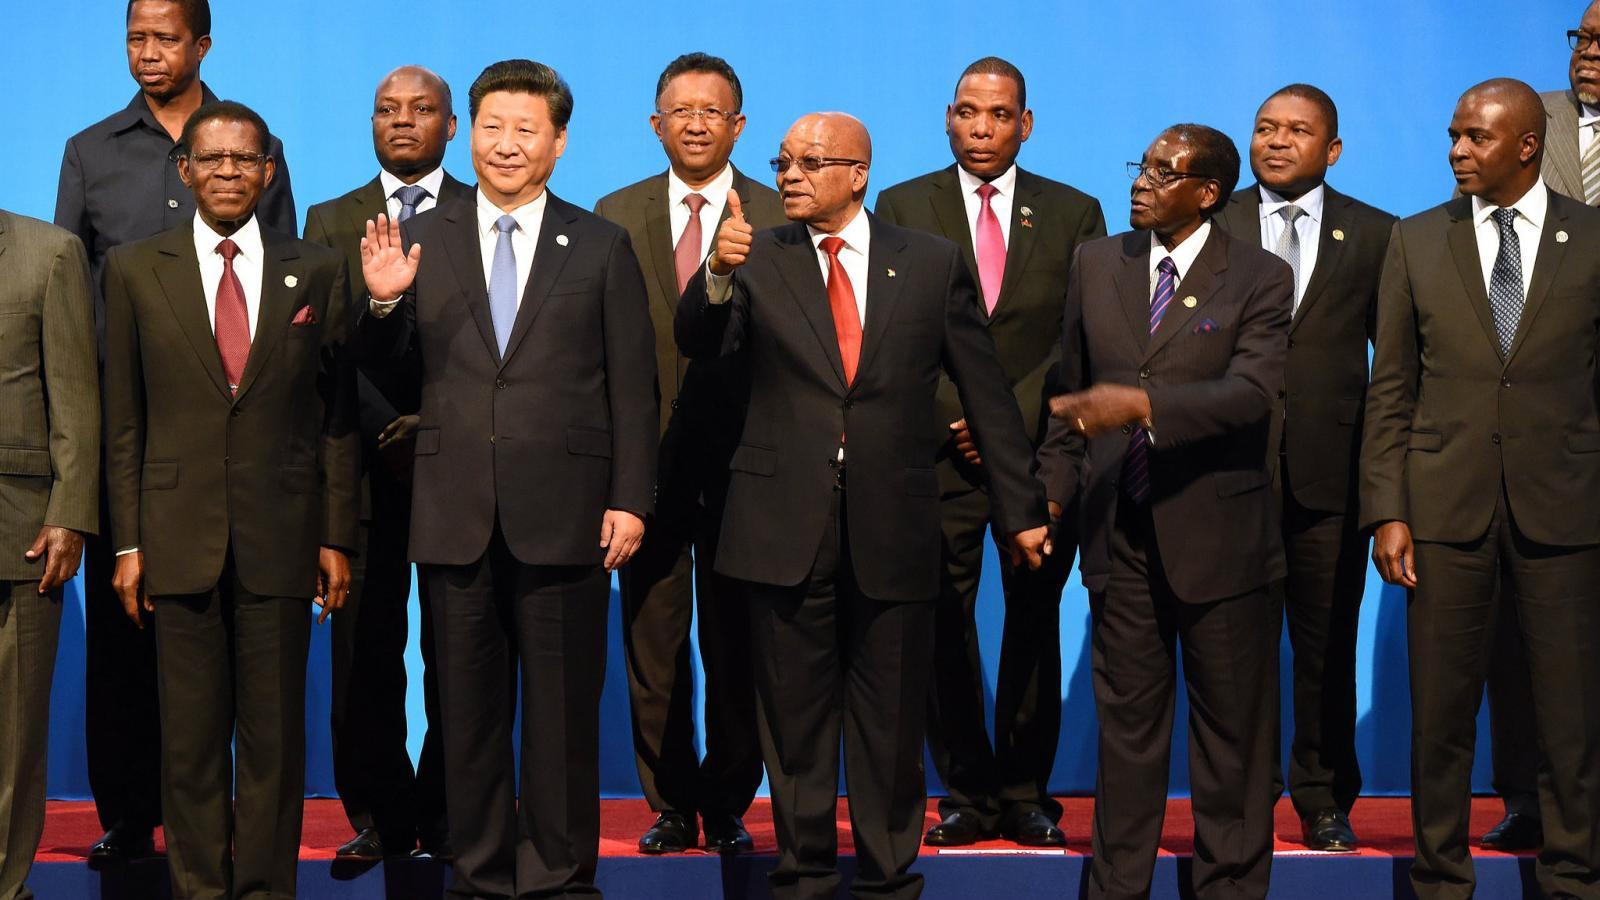 China's Xi Jinping pledges $60 billion to help Africa solve its problems  its own way — Quartz Africa